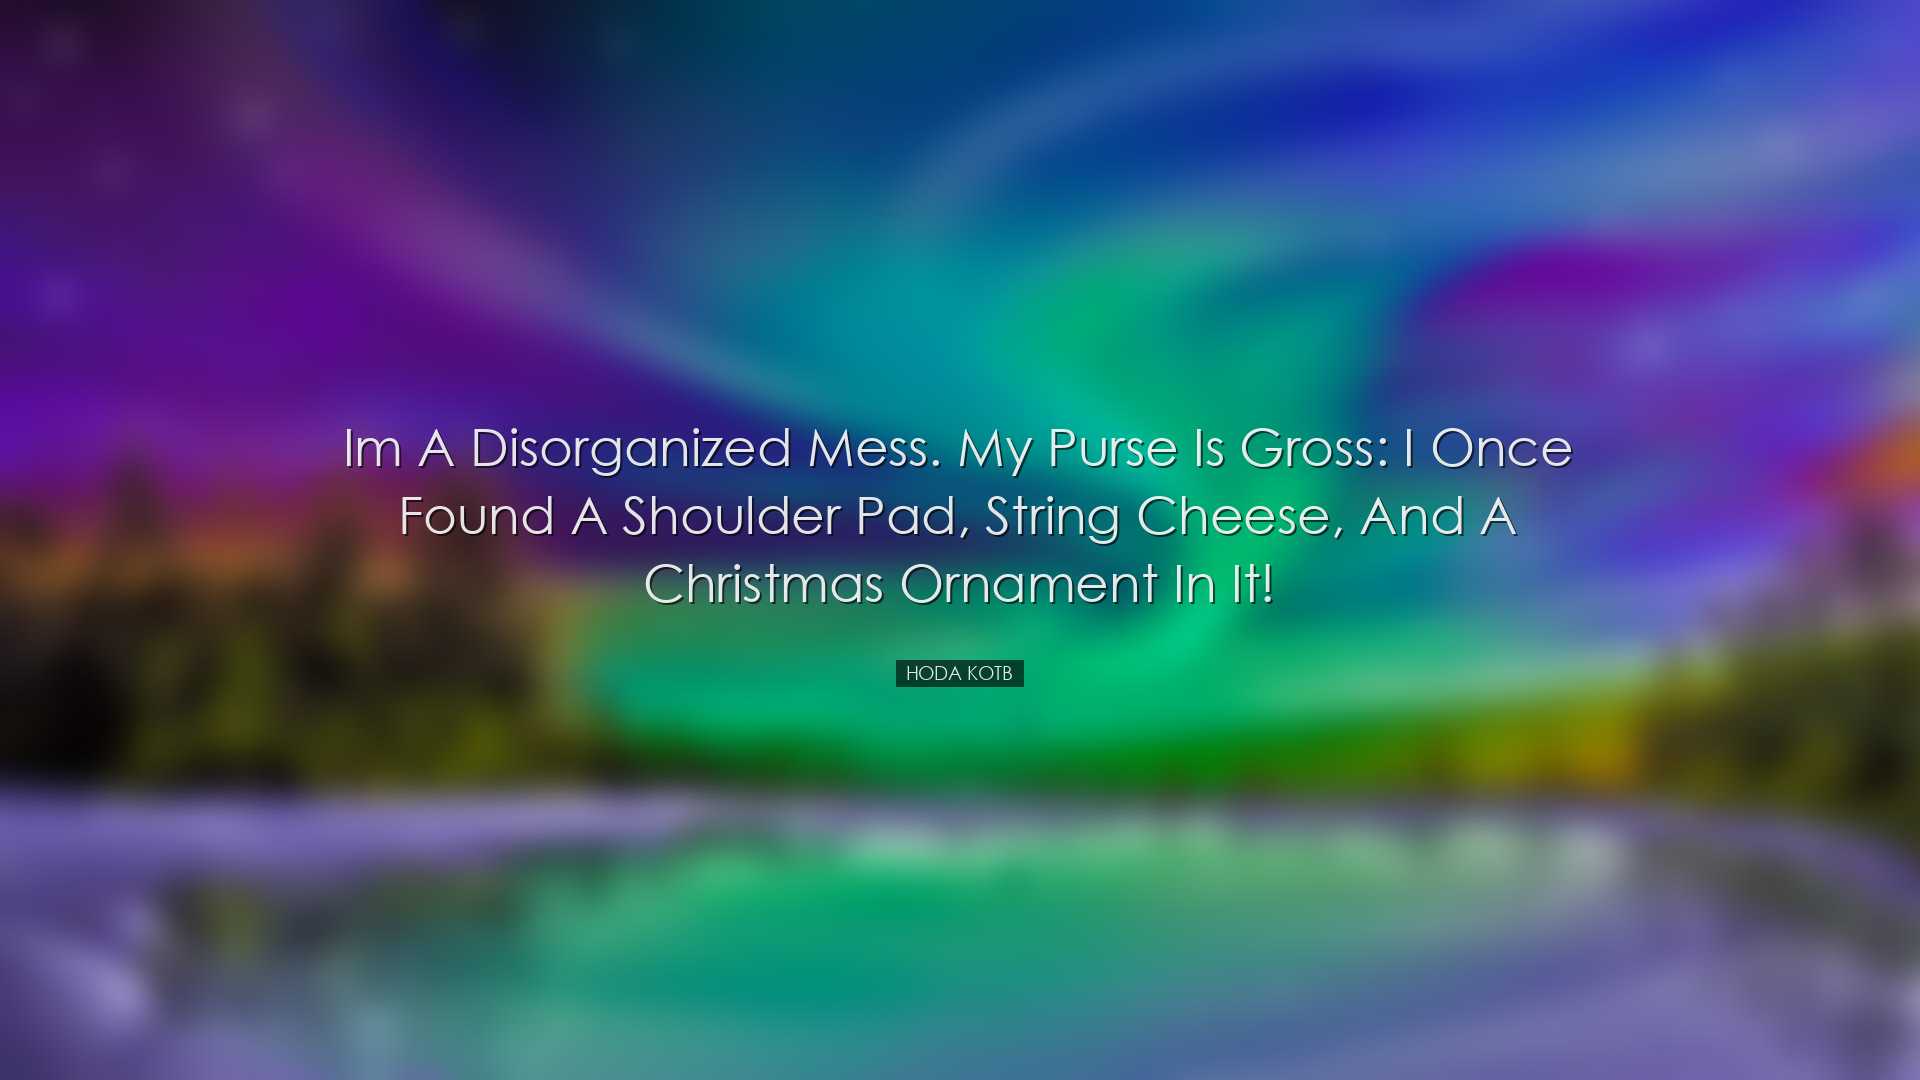 Im a disorganized mess. My purse is gross: I once found a shoulder